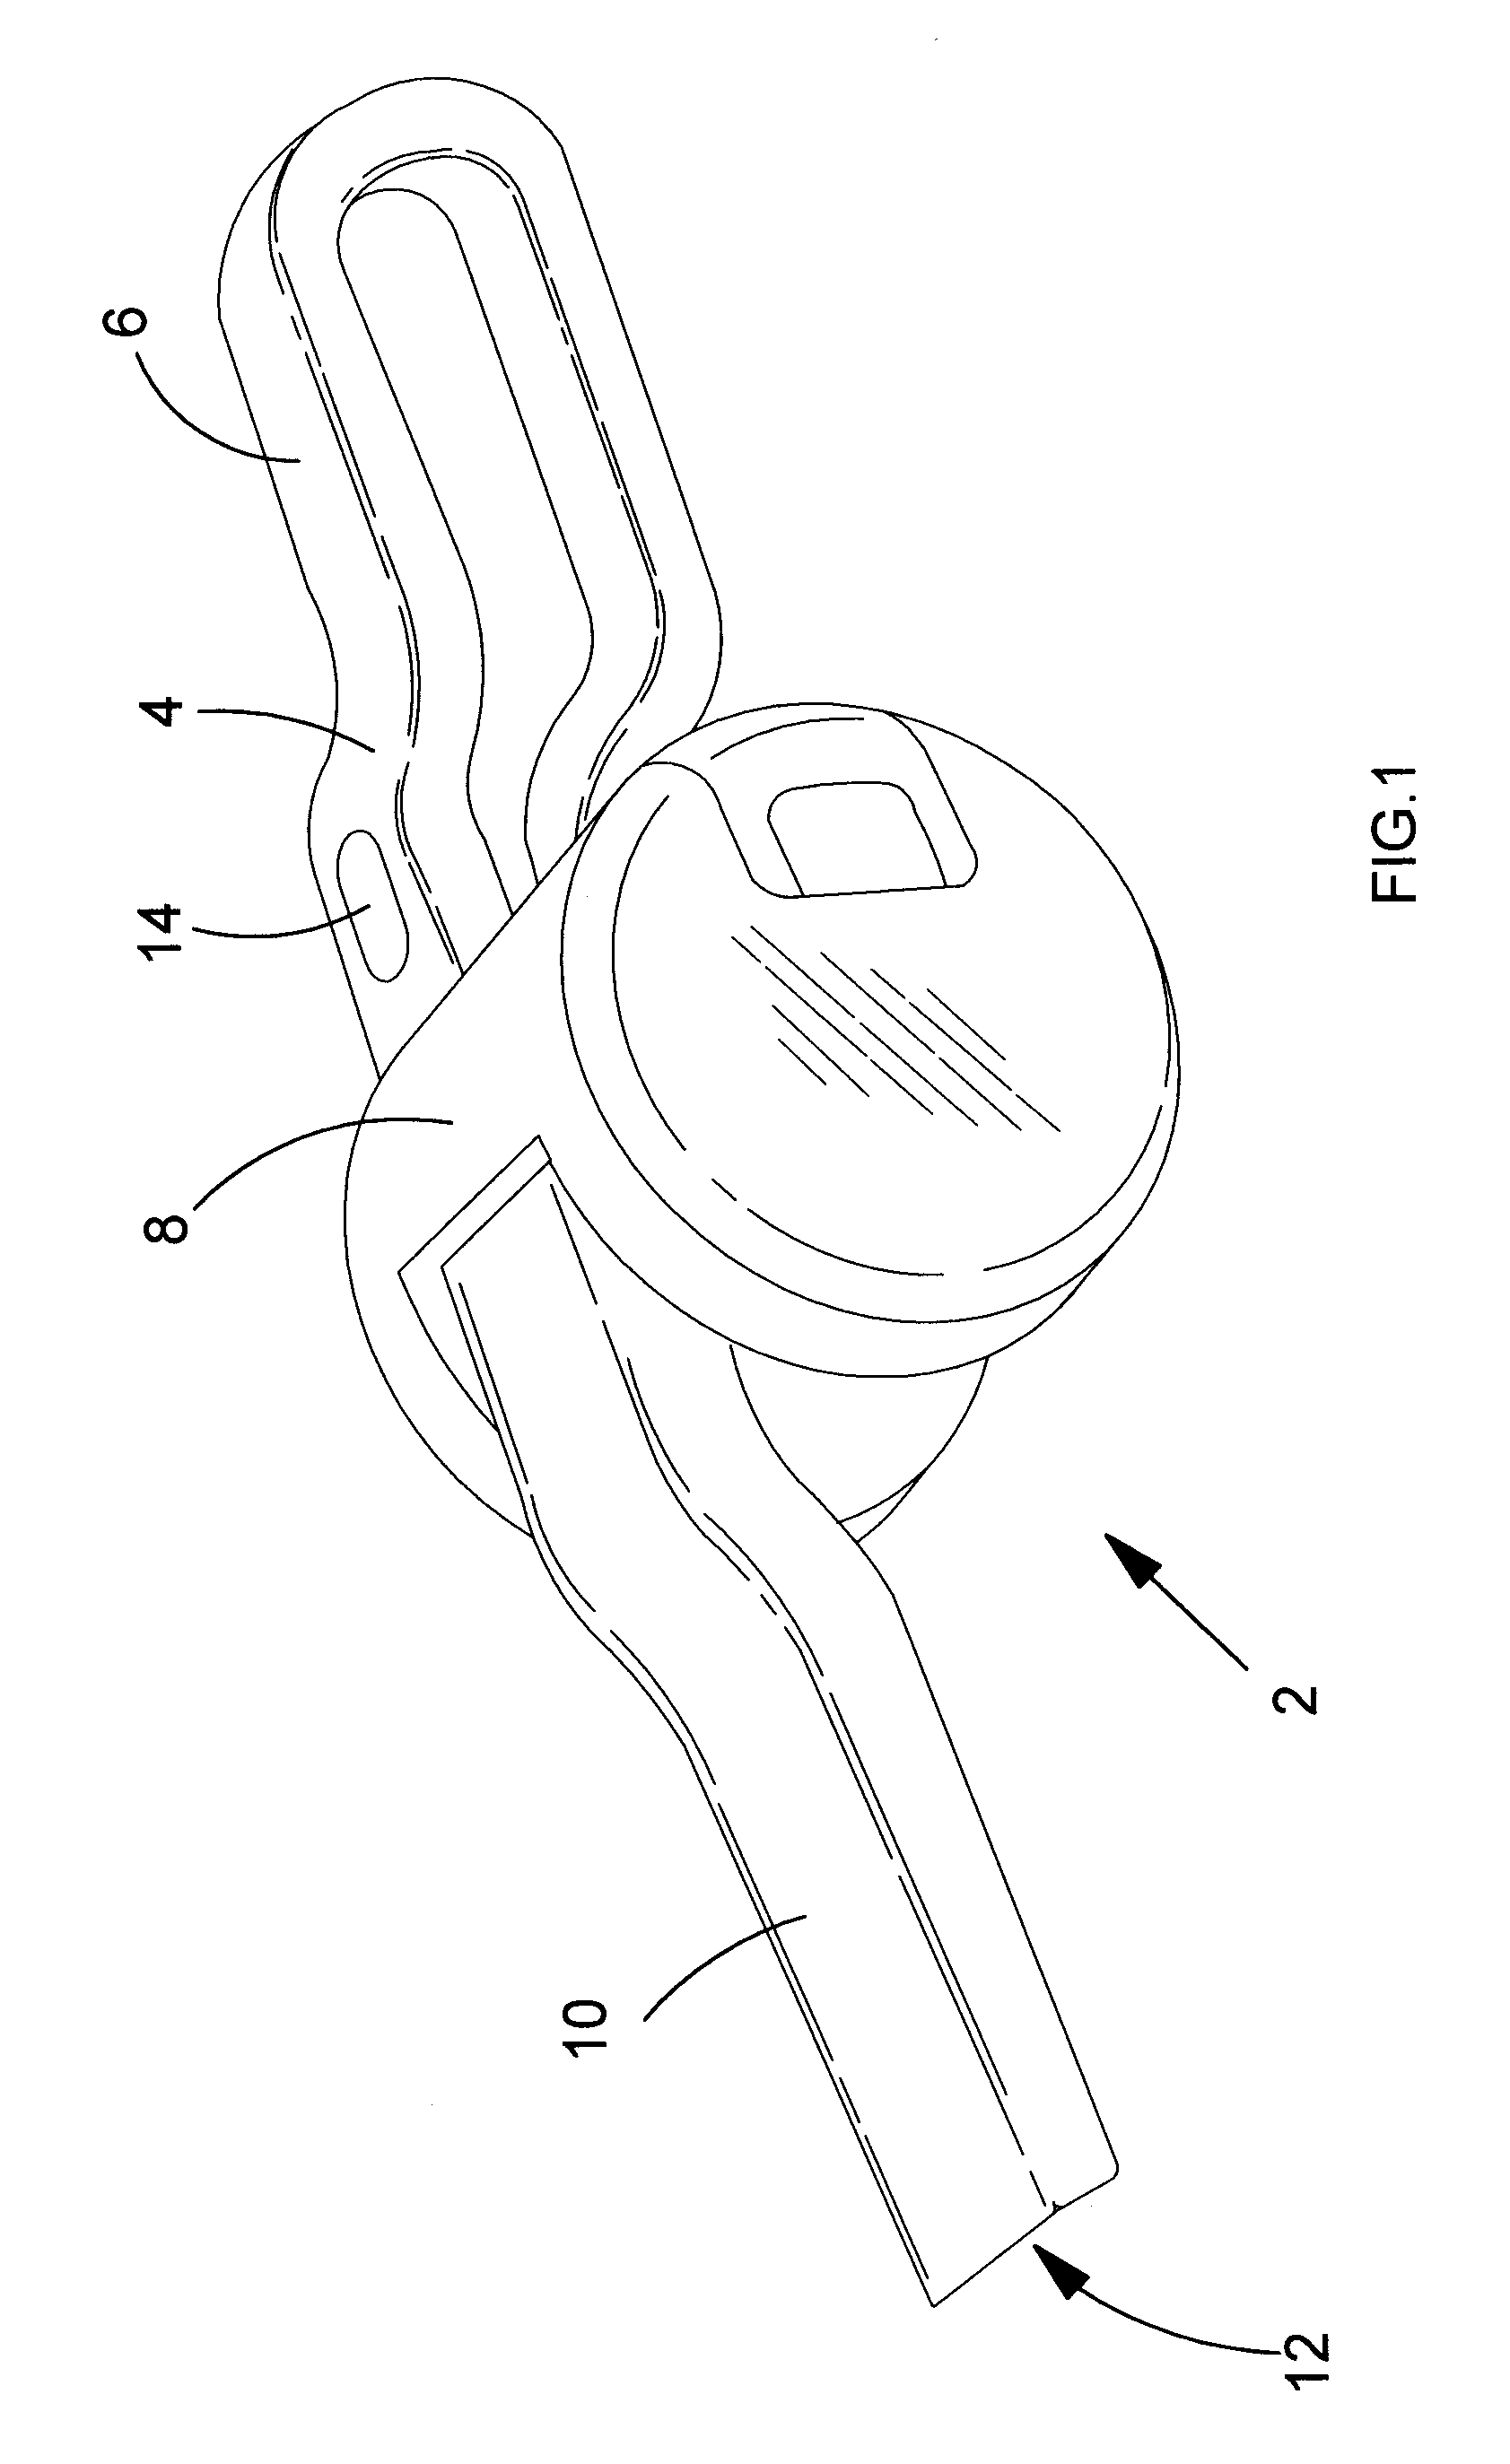 Motor, fan and cyclonic separation apparatus arrangement for a vacuum cleaner